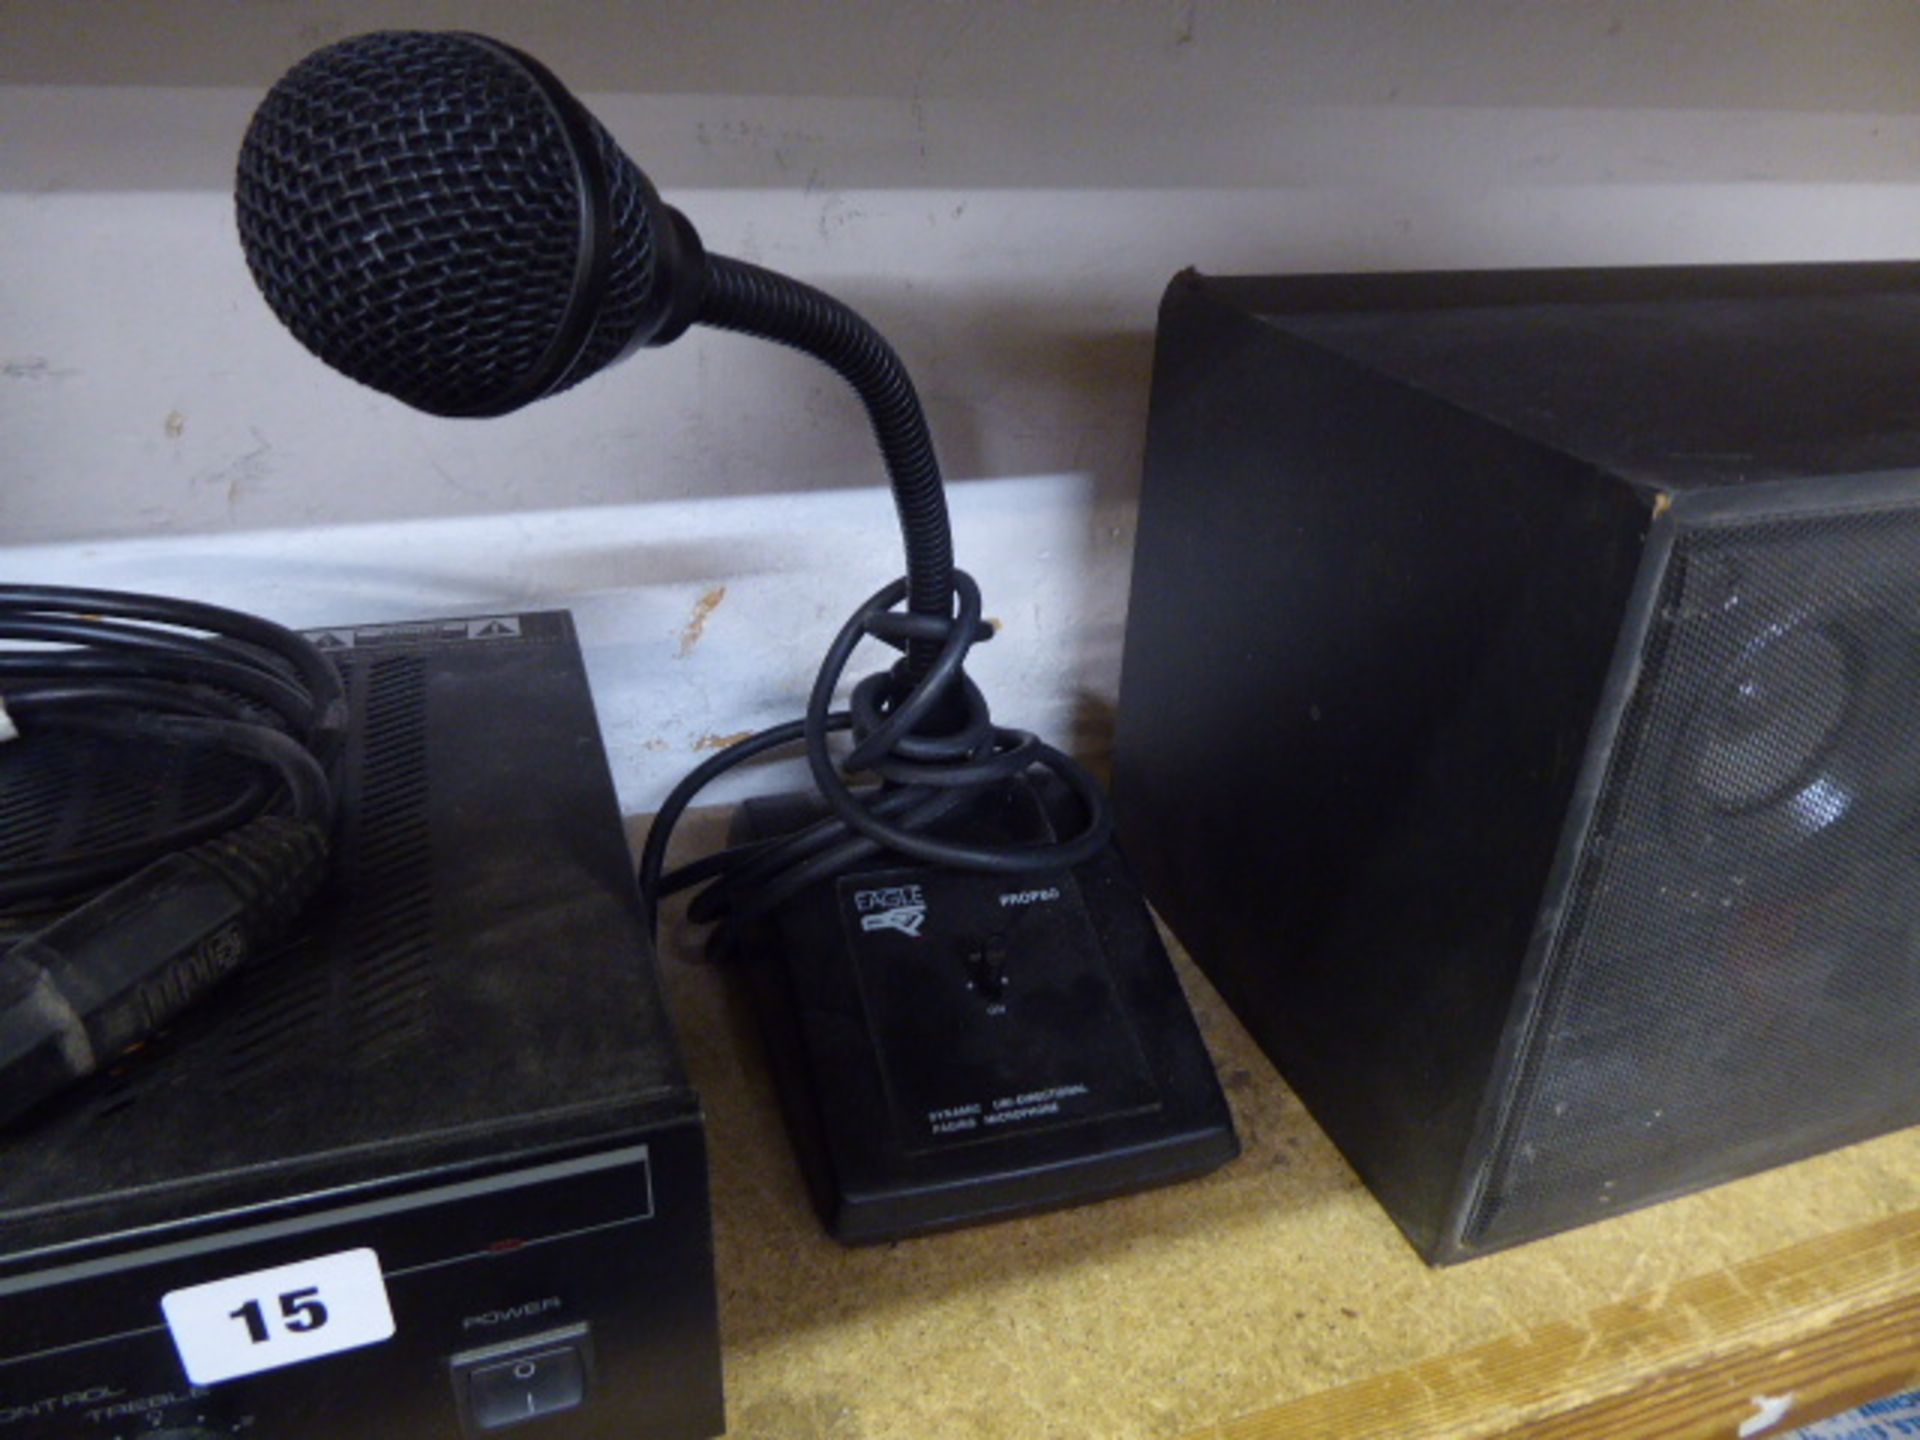 Eagle public address amplifier with eagle microphone and speaker - Image 3 of 3